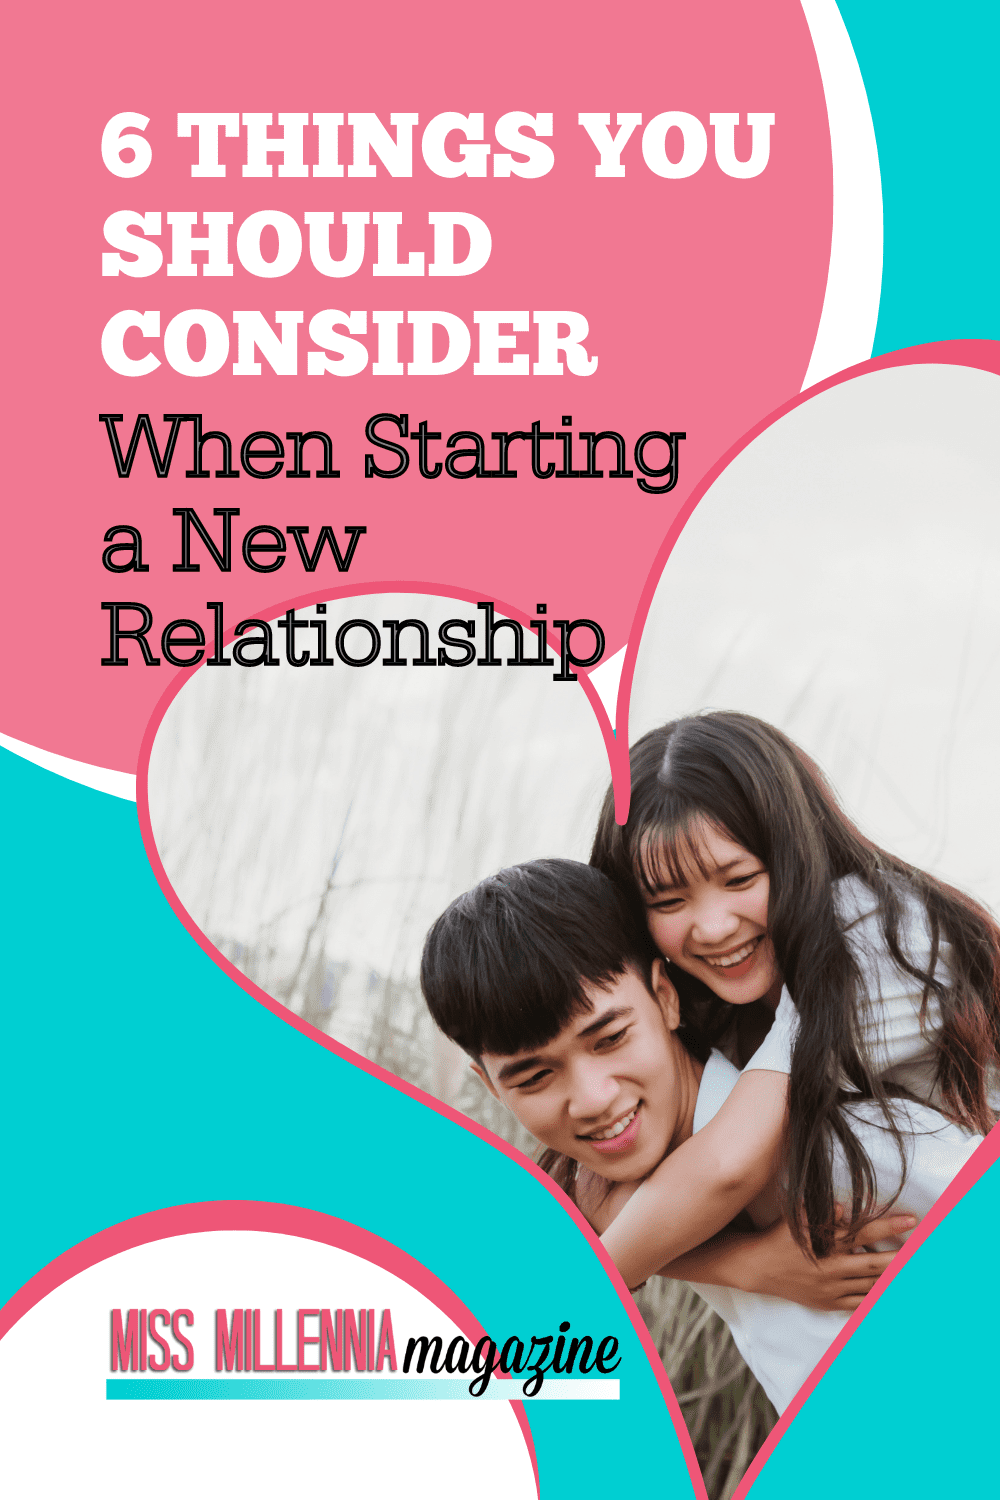 6 Things You Should Consider When Starting a New Relationship